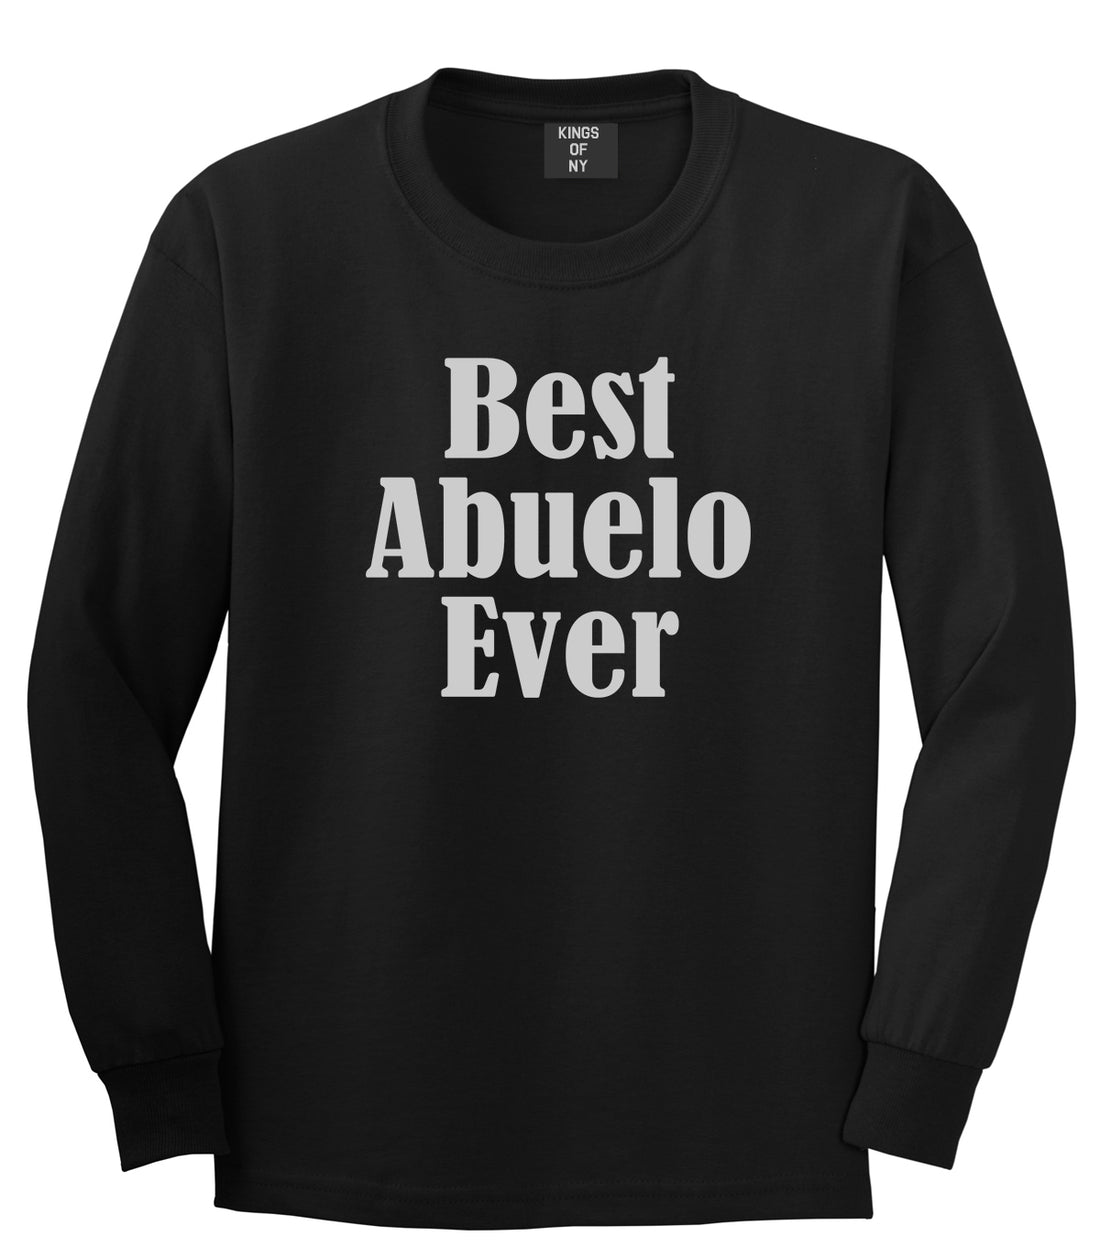 Best Abuelo Ever Grandpa Spanish Fathers Day Mens Long Sleeve T-Shirt Black by Kings Of NY